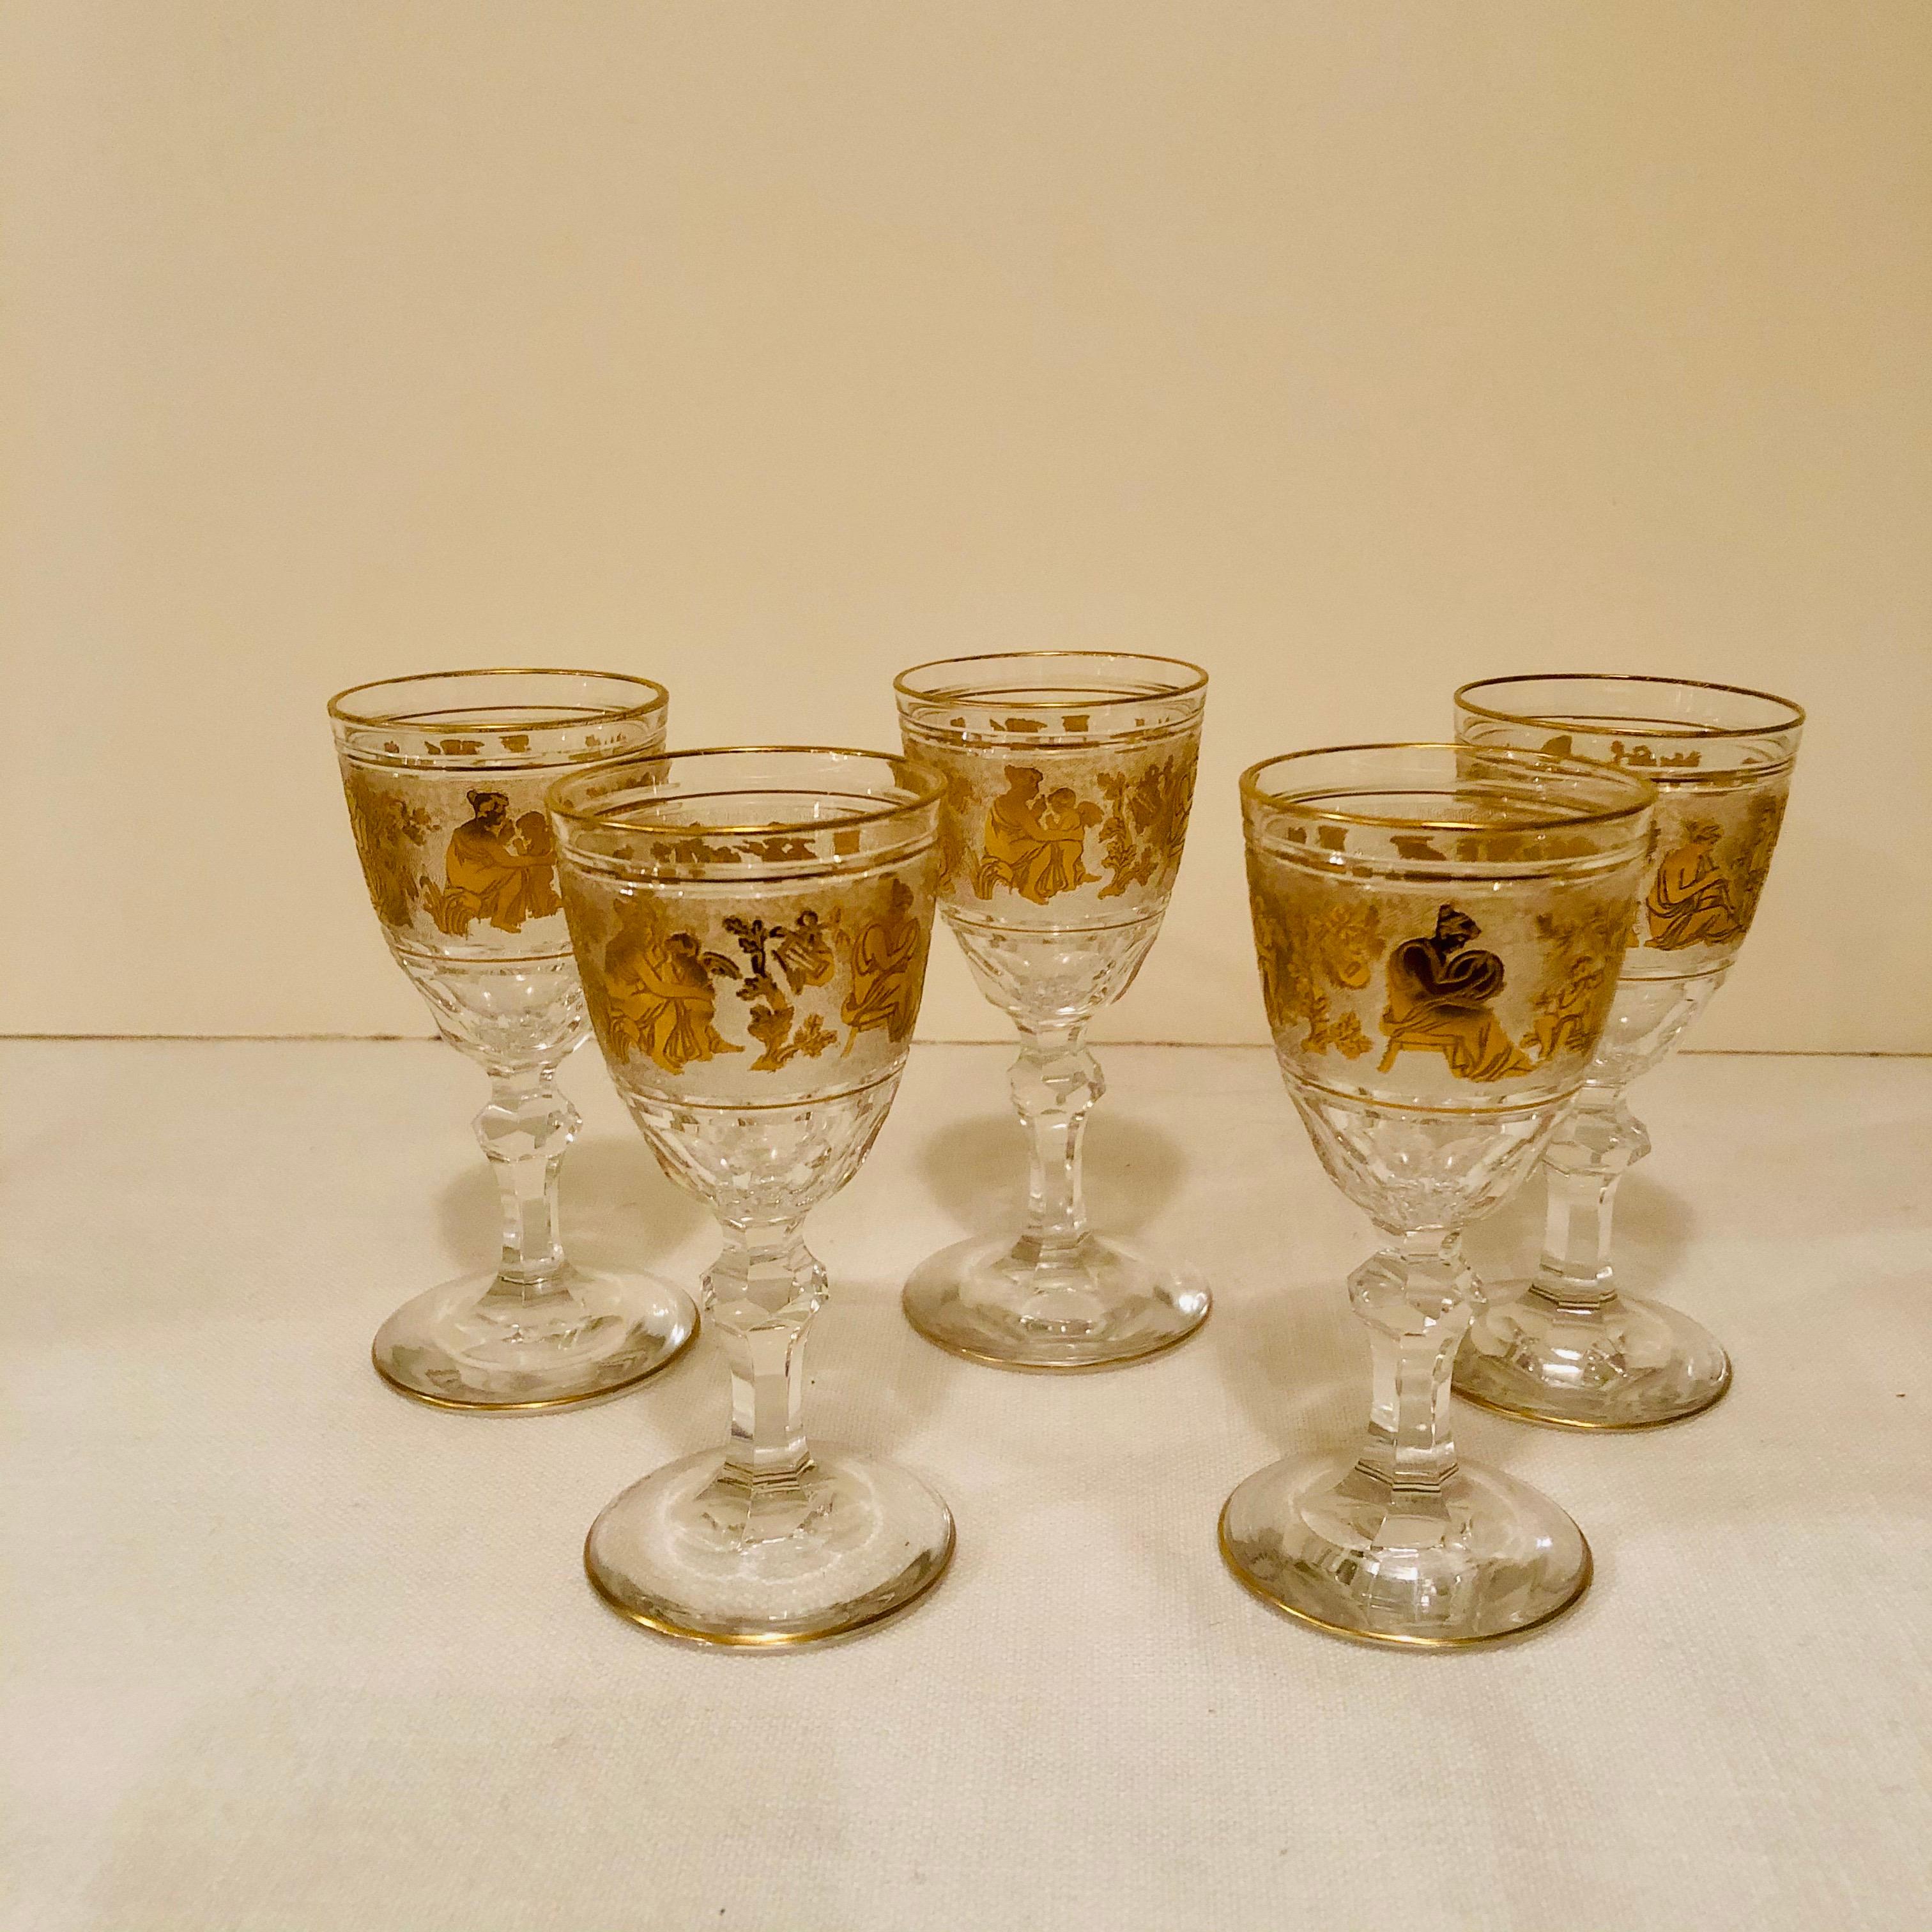 These are a set of rare hand blown Val Saint Lambert cut cameo glass sherries or ports with gold leaf decorations of a lady with a cherub, ladies and a cherub and a lady and man with a cherub. These gold leaf decorations are very detailed and